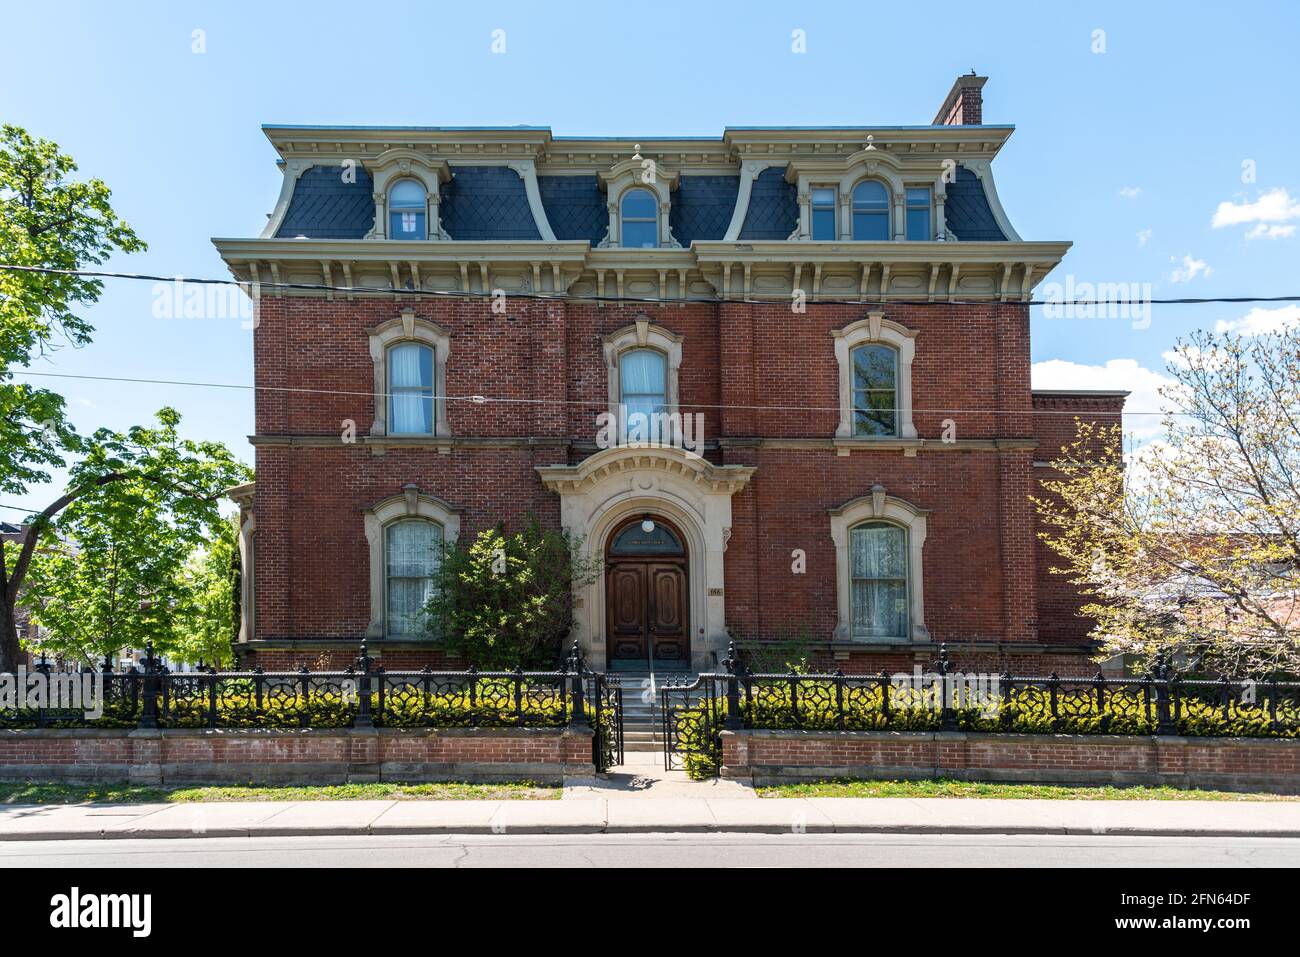 The George Brown heritage house in Toronto, Canada. Architectural details of the Second Empire-style building. Stock Photo